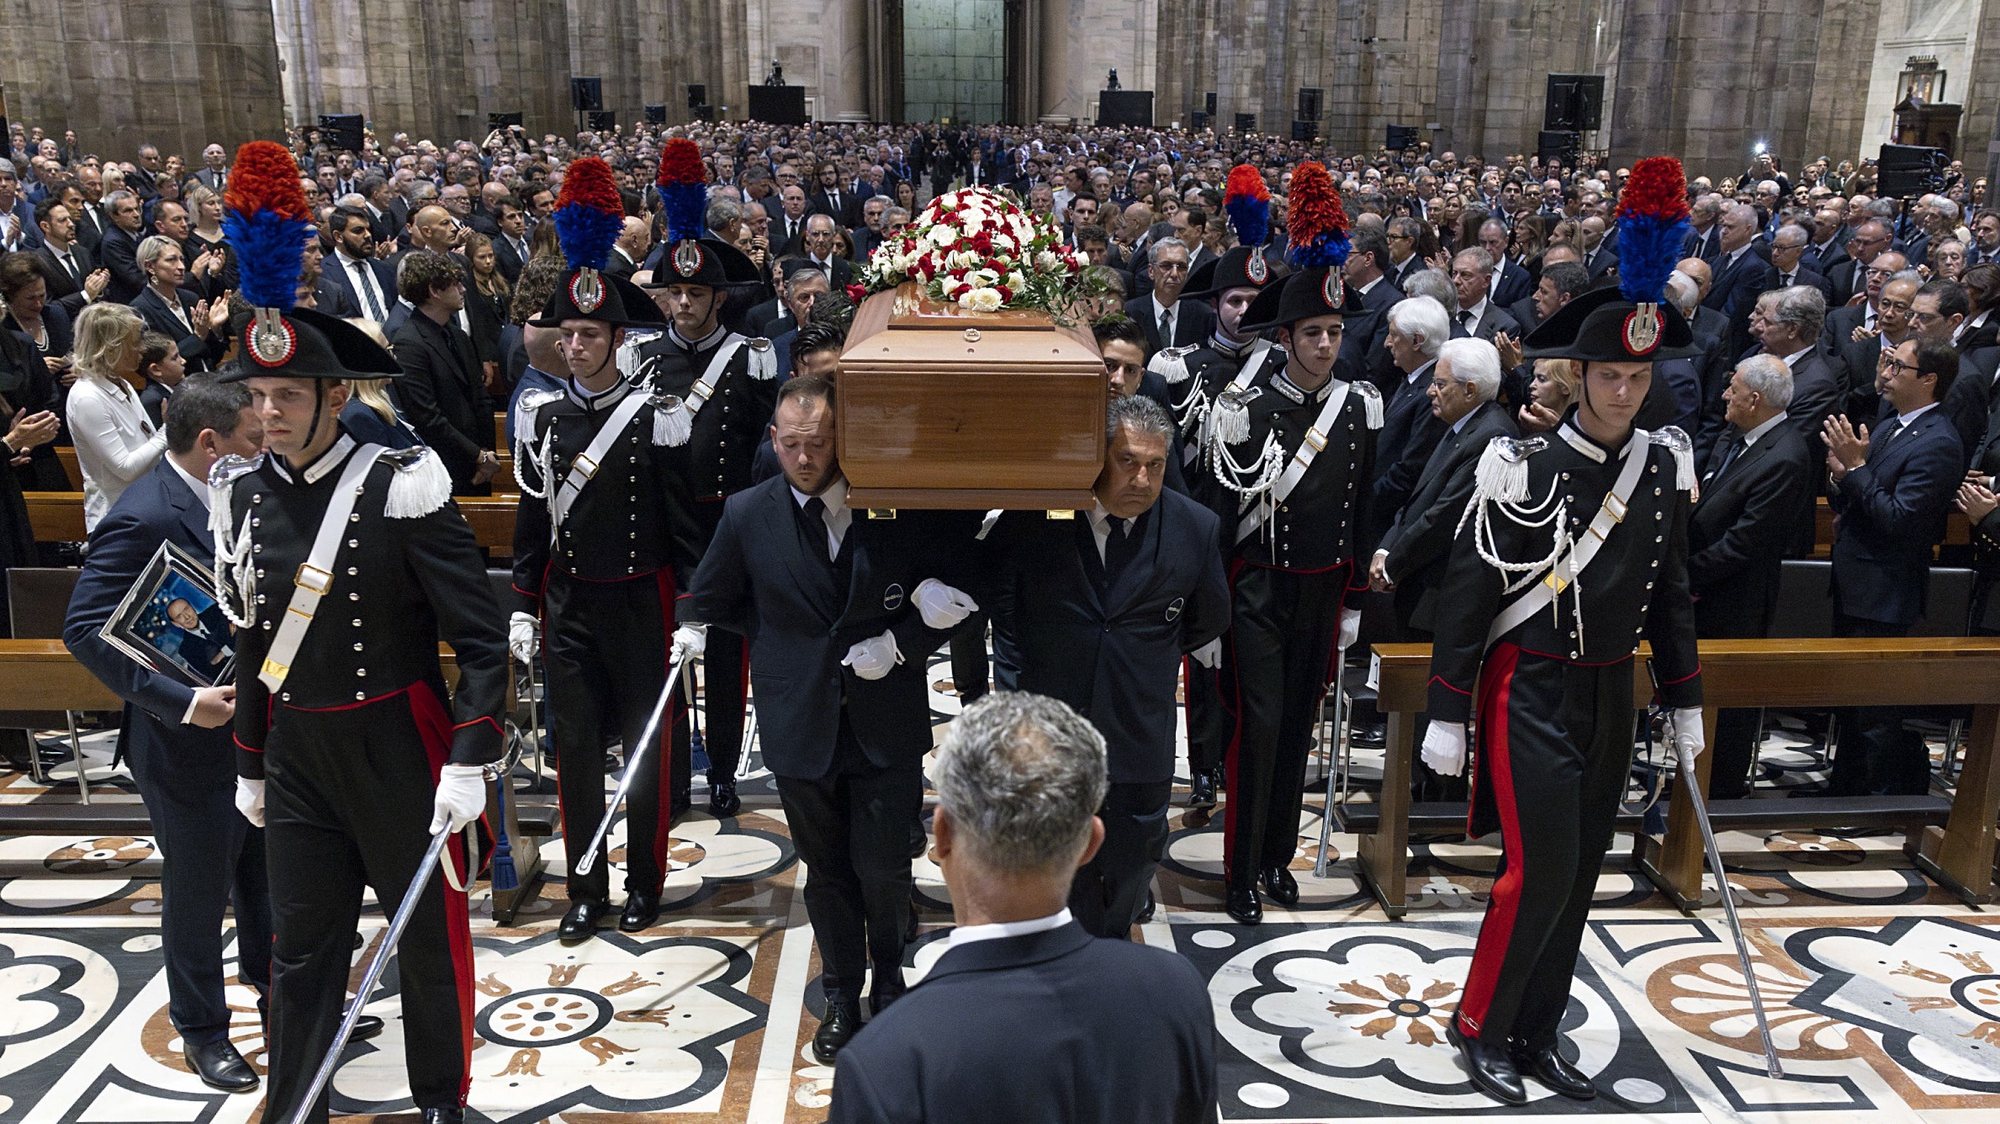 epa10690825 The coffin of Italy&#039;s former prime minister and media mogul Silvio Berlusconi is carried during the state funeral at the Milan Cathedral (Duomo), in Milan, Italy, 14 June 2023 Silvio Berlusconi died at the age of 86 on 12 June 2023 at Milan&#039;s San Raffaele hospital. The Italian media tycoon and Forza Italia (FI) party founder, dubbed as &#039;Il Cavaliere&#039; (The Knight), served as prime minister of Italy in four governments. The Italian government has declared 14 June 2023 a national day of mourning.  EPA/PAOLO G / QUIRINAL PALACE PRESS OFFICE / HANDOUT  HANDOUT EDITORIAL USE ONLY/NO SALES